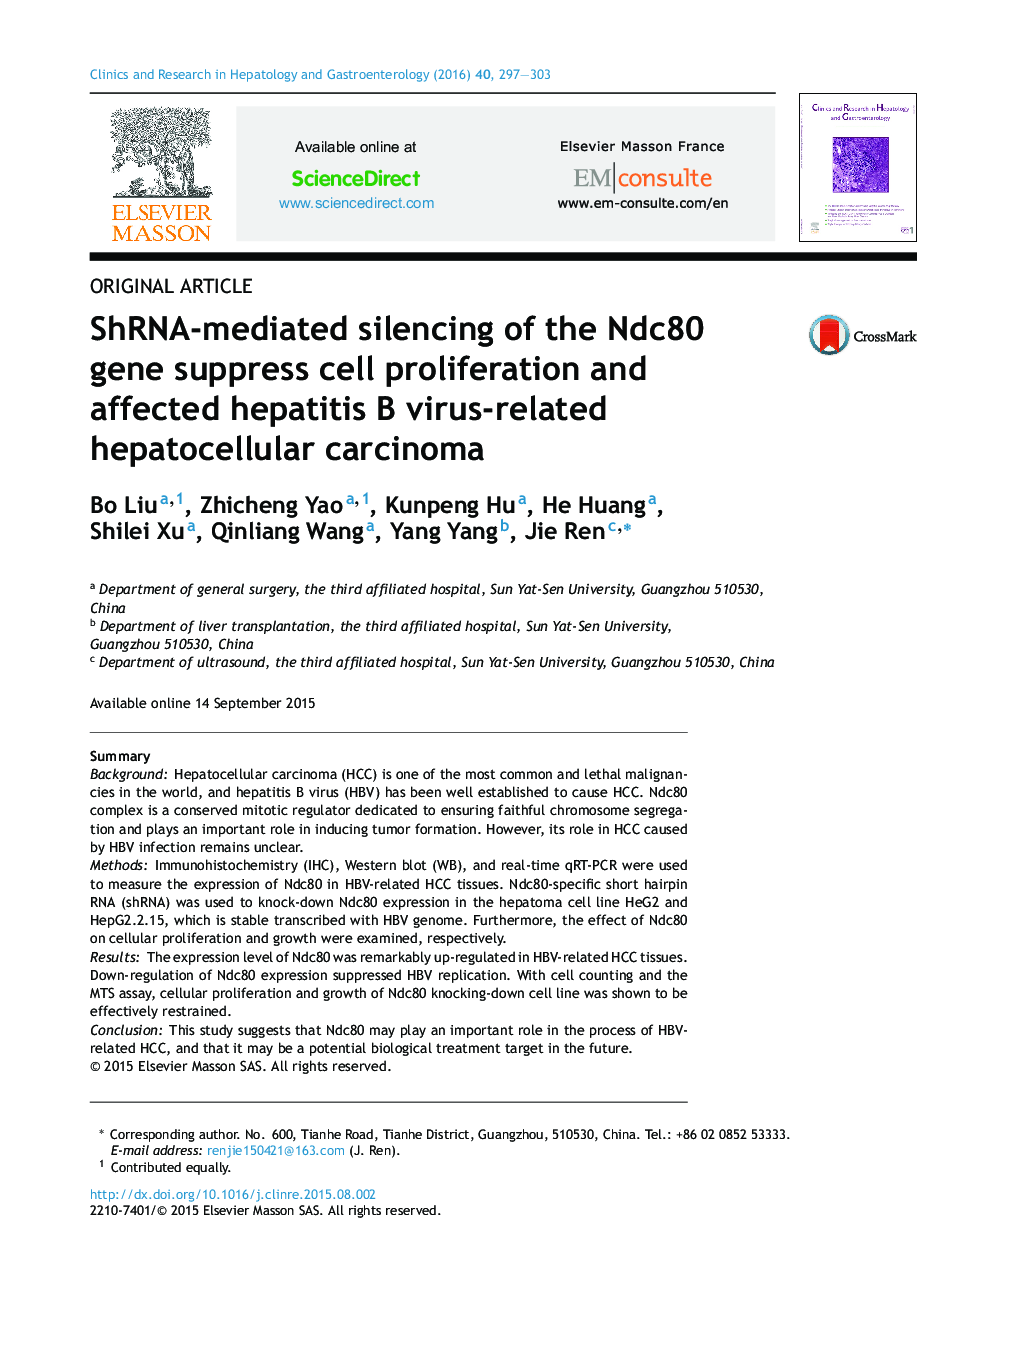 ShRNA-mediated silencing of the Ndc80 gene suppress cell proliferation and affected hepatitis B virus-related hepatocellular carcinoma